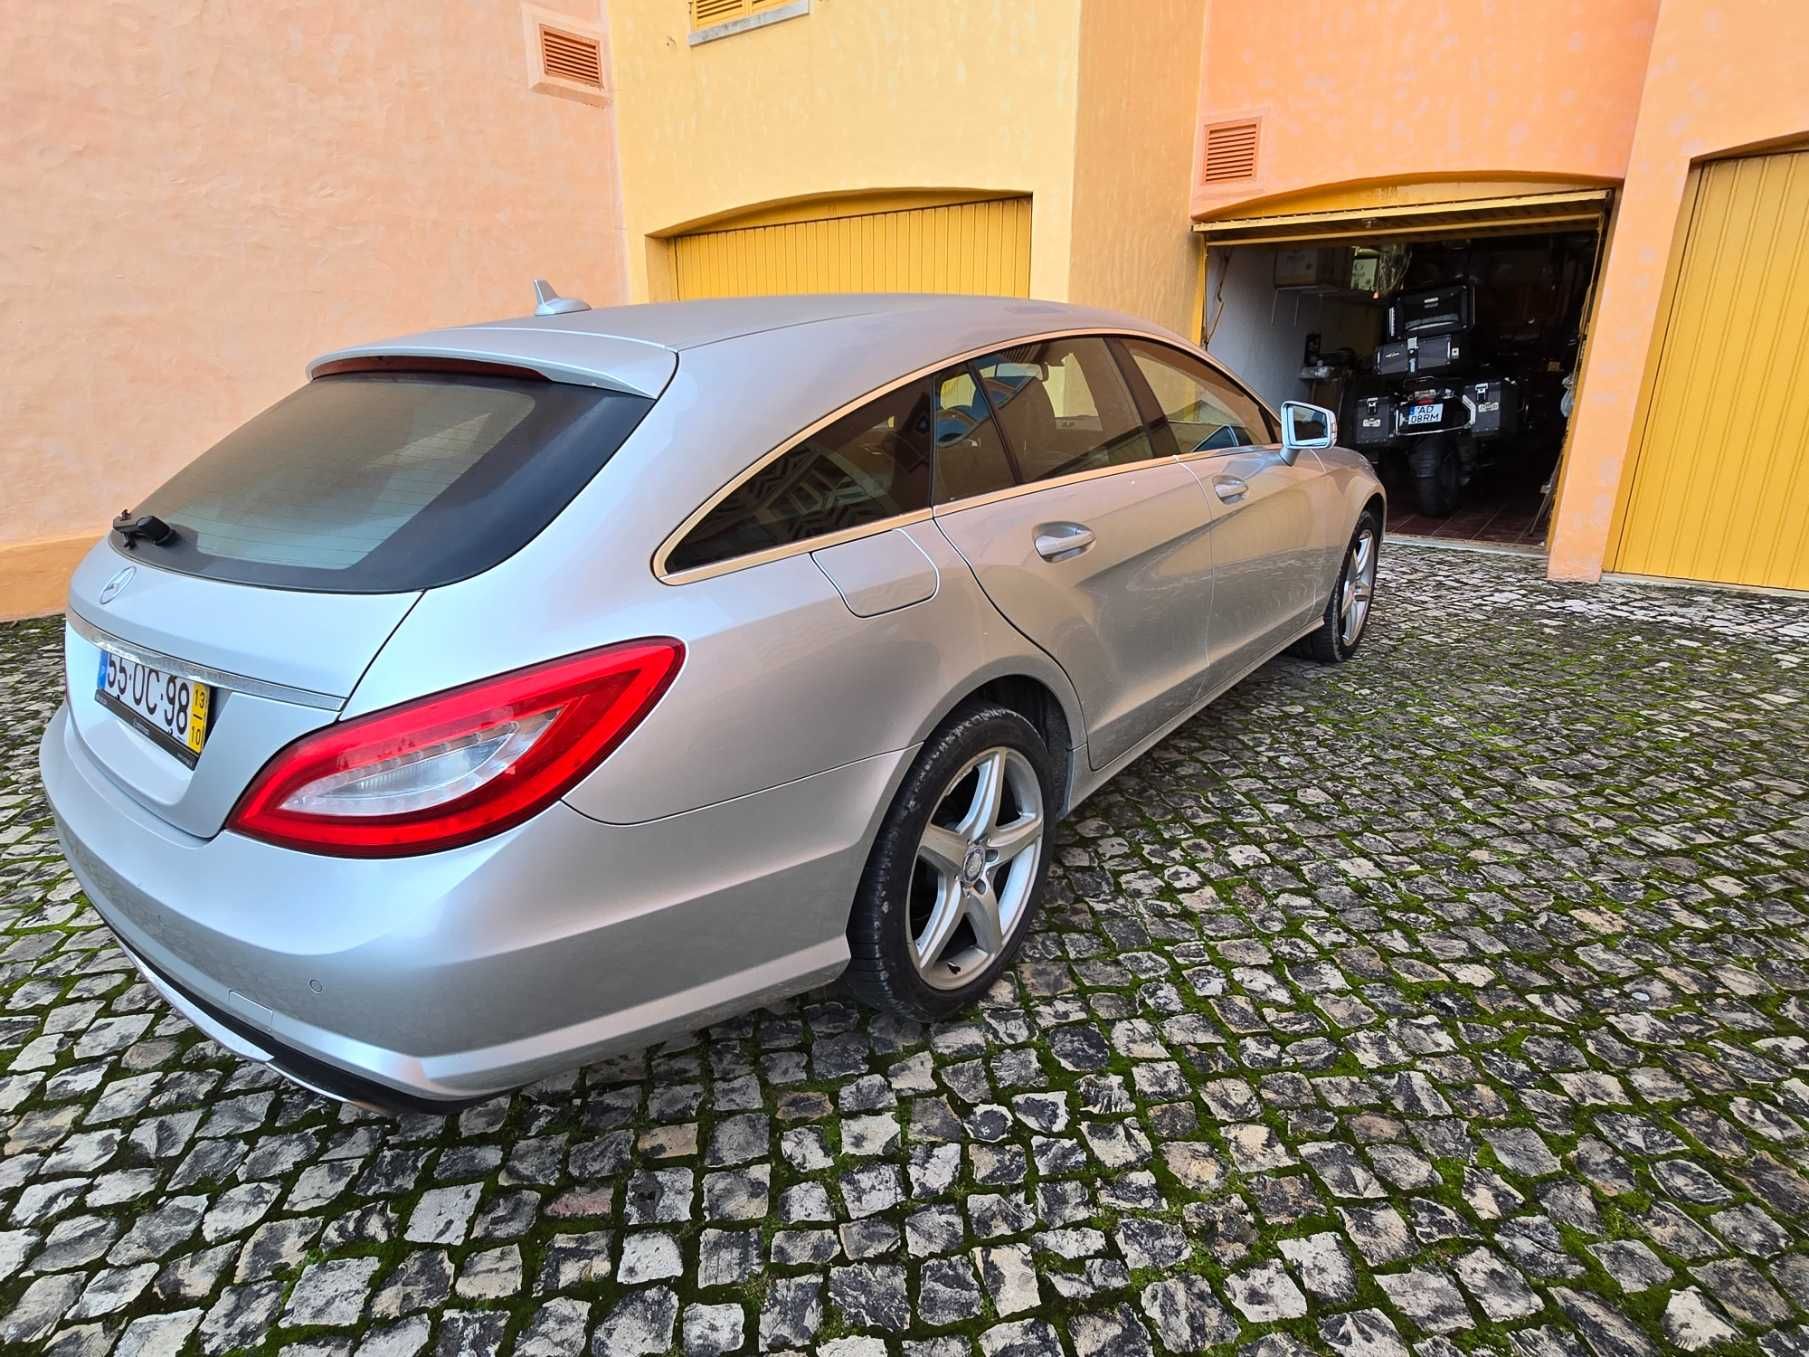 Mercedes CLS350 CDI AMG (poucos kms)